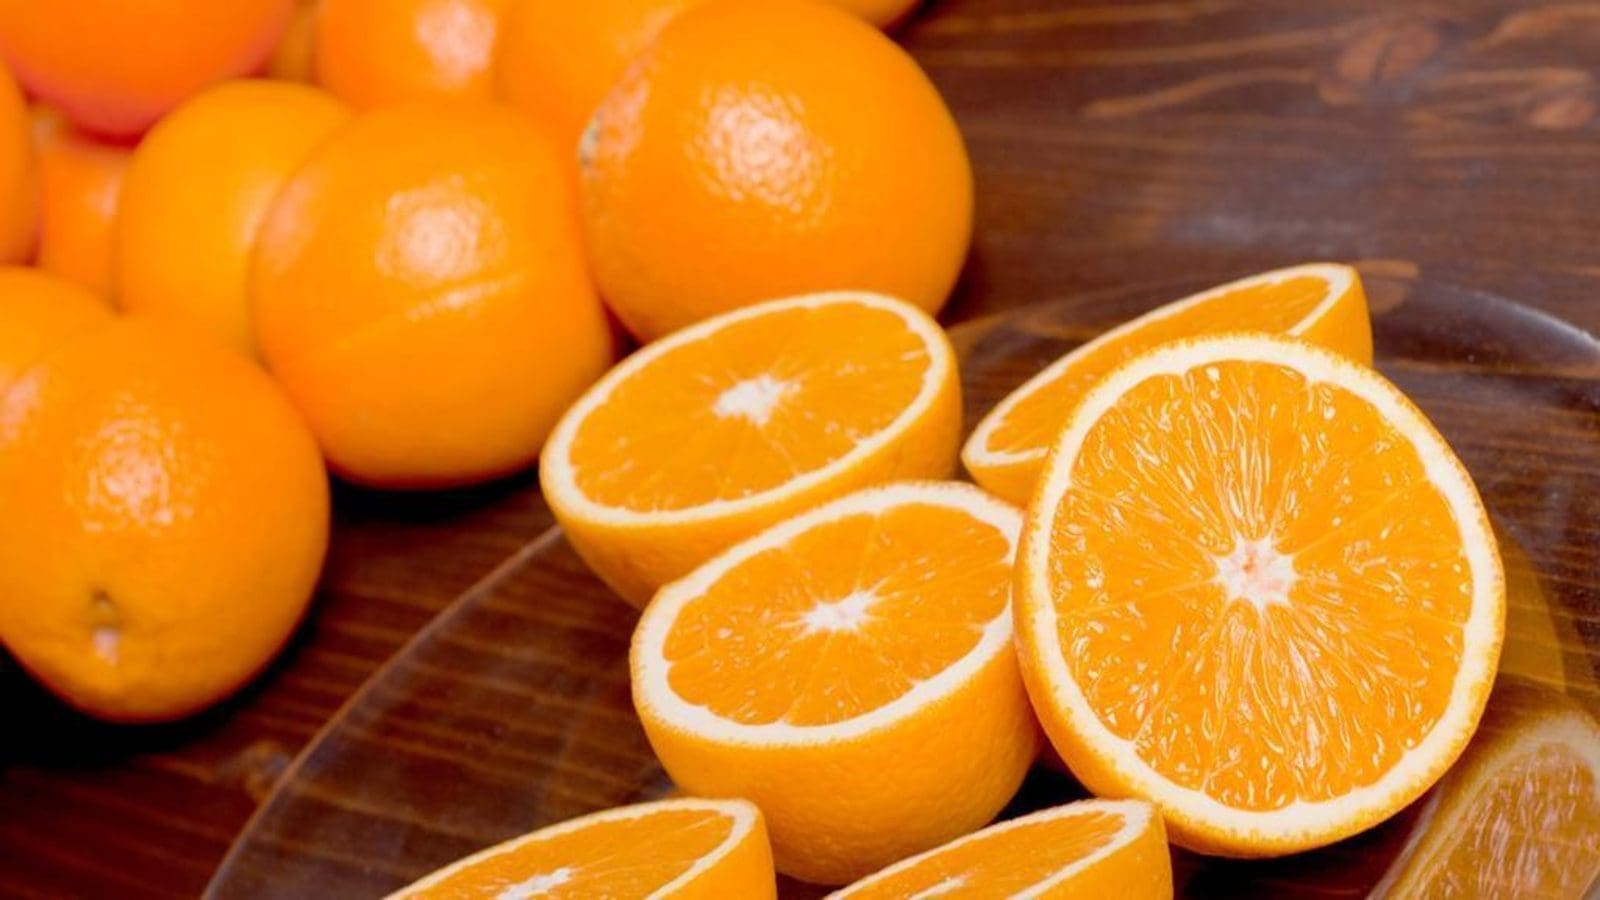 Citrus Growers Association of South Africa calls on WTO to intervene in EU orange export stalemate